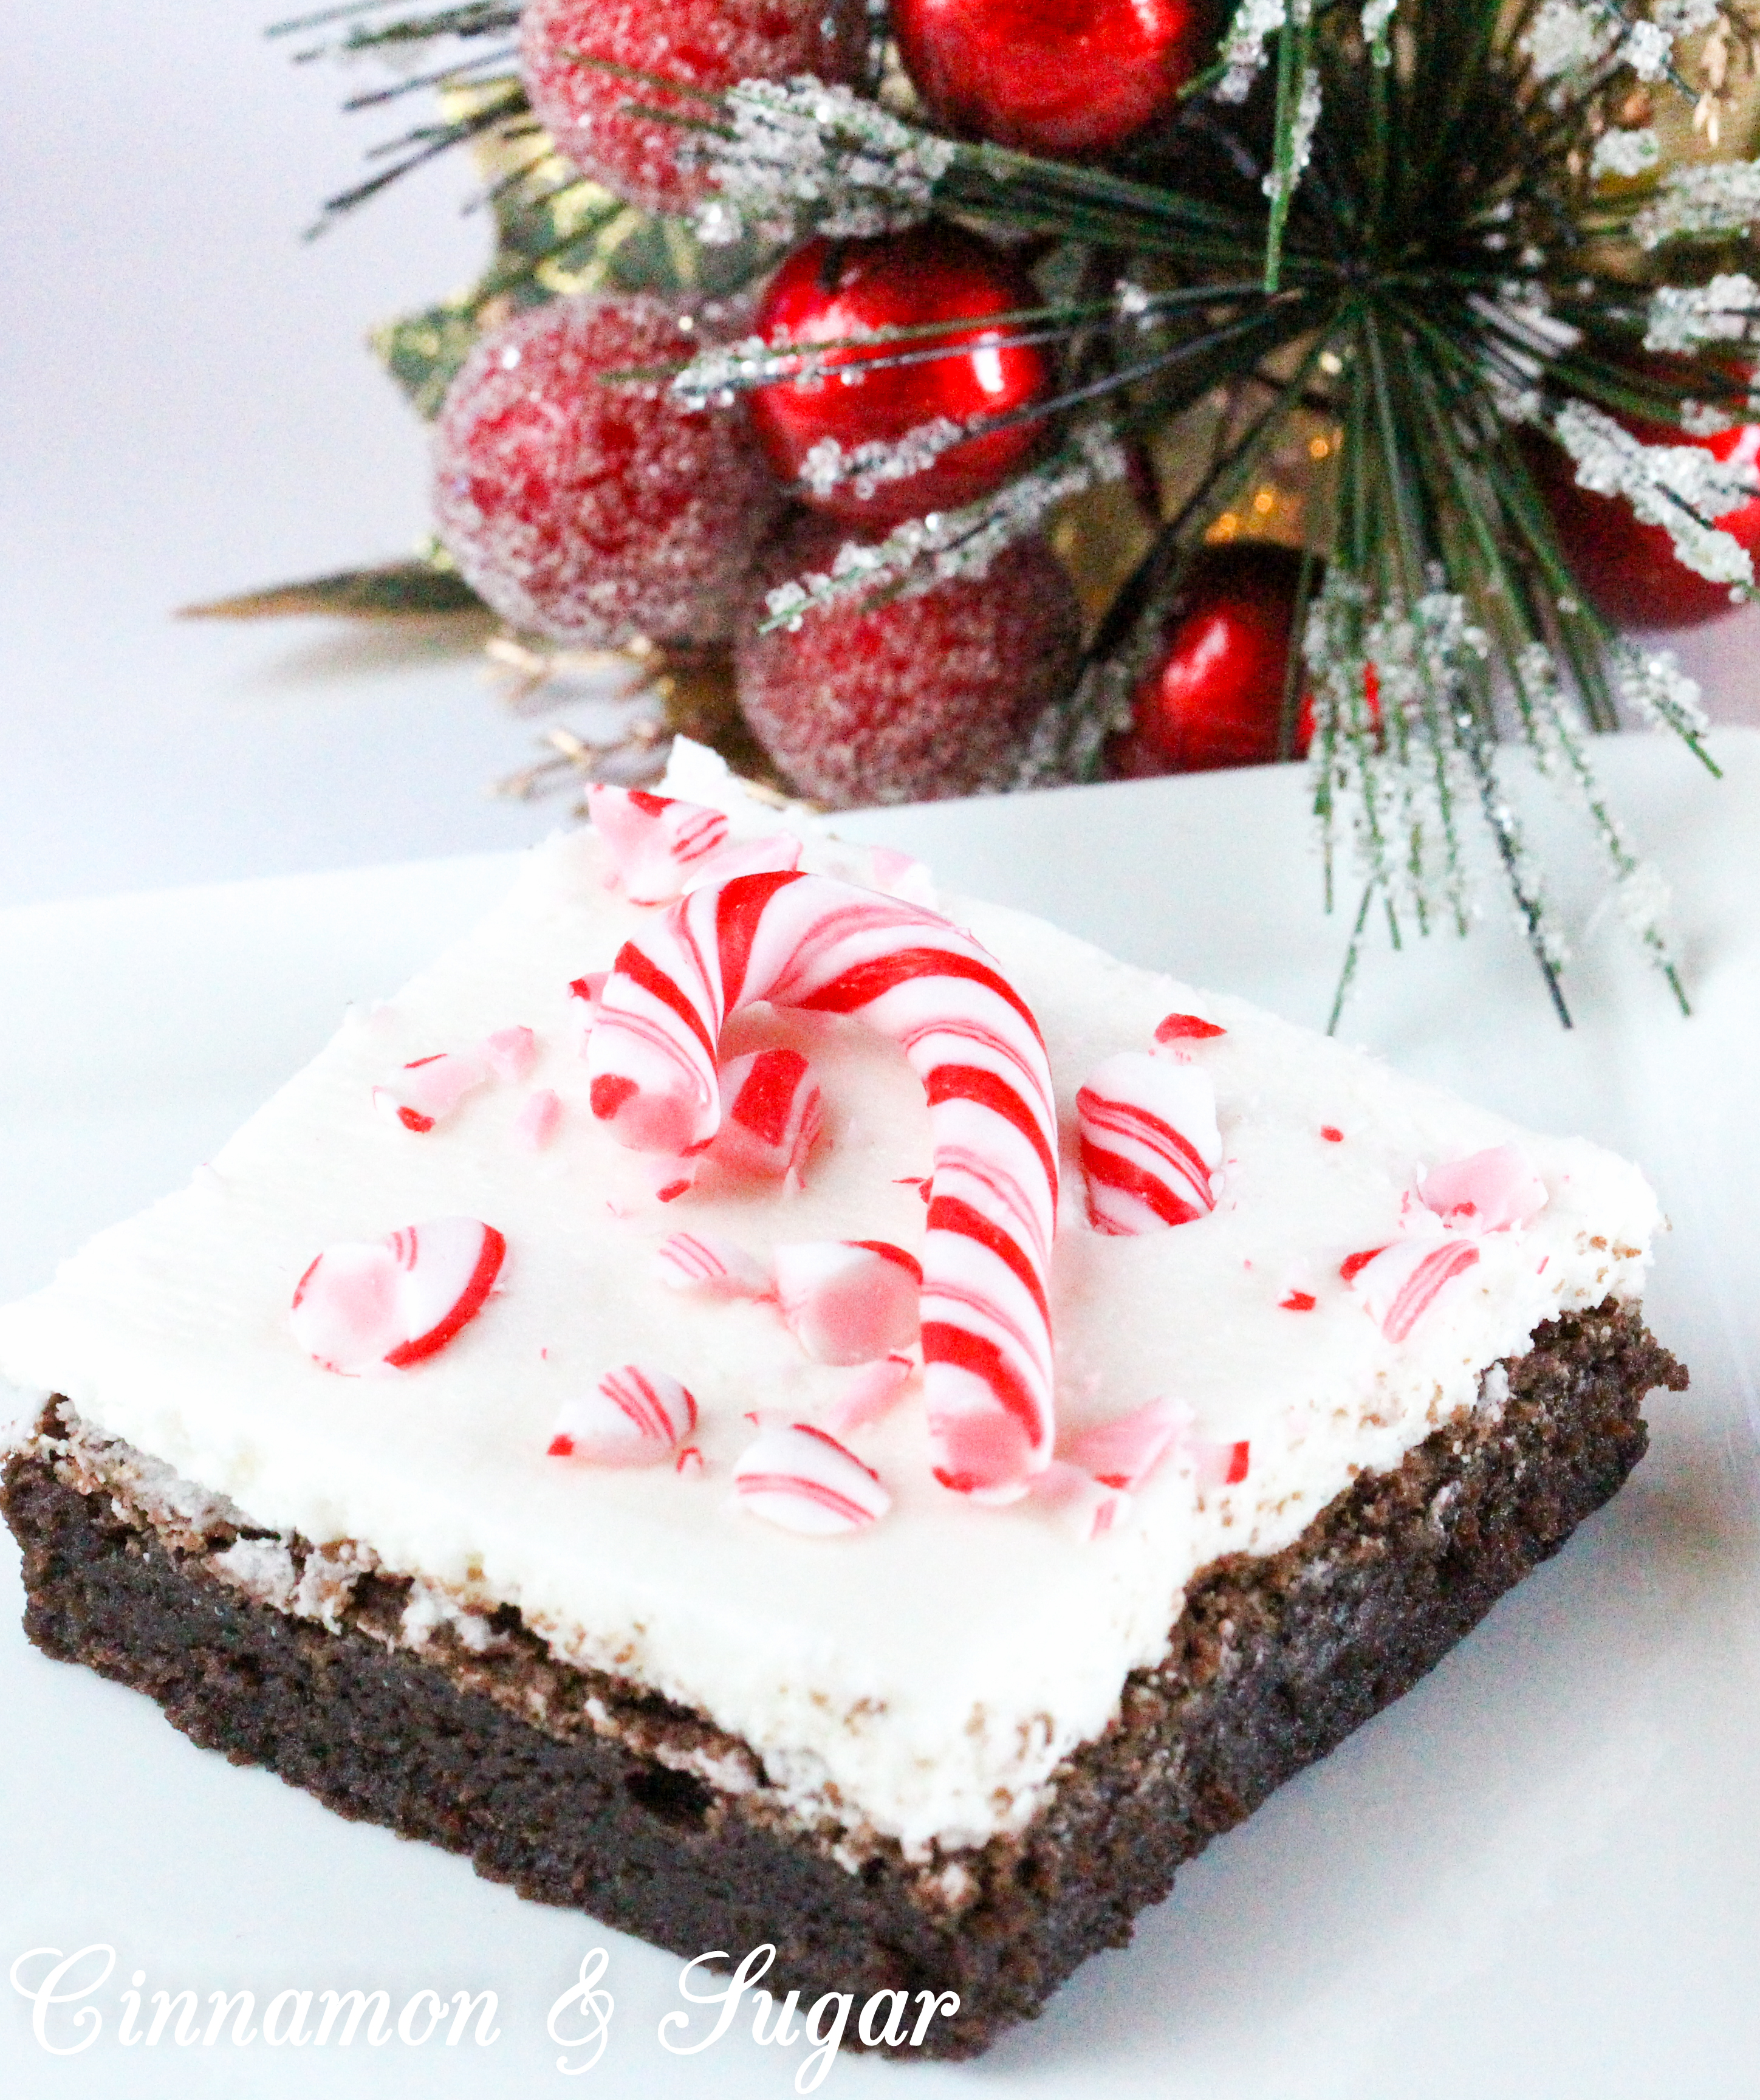 Candy Cane Brownies combine the yummy flavors of chocolate and peppermint while the added crunch of crushed candy canes sprinkled on top of the frosted brownies adds a festive touch. Recipe shared with permission granted by Catherine Bruns, author of GINGER SNAPPED TO DEATH.